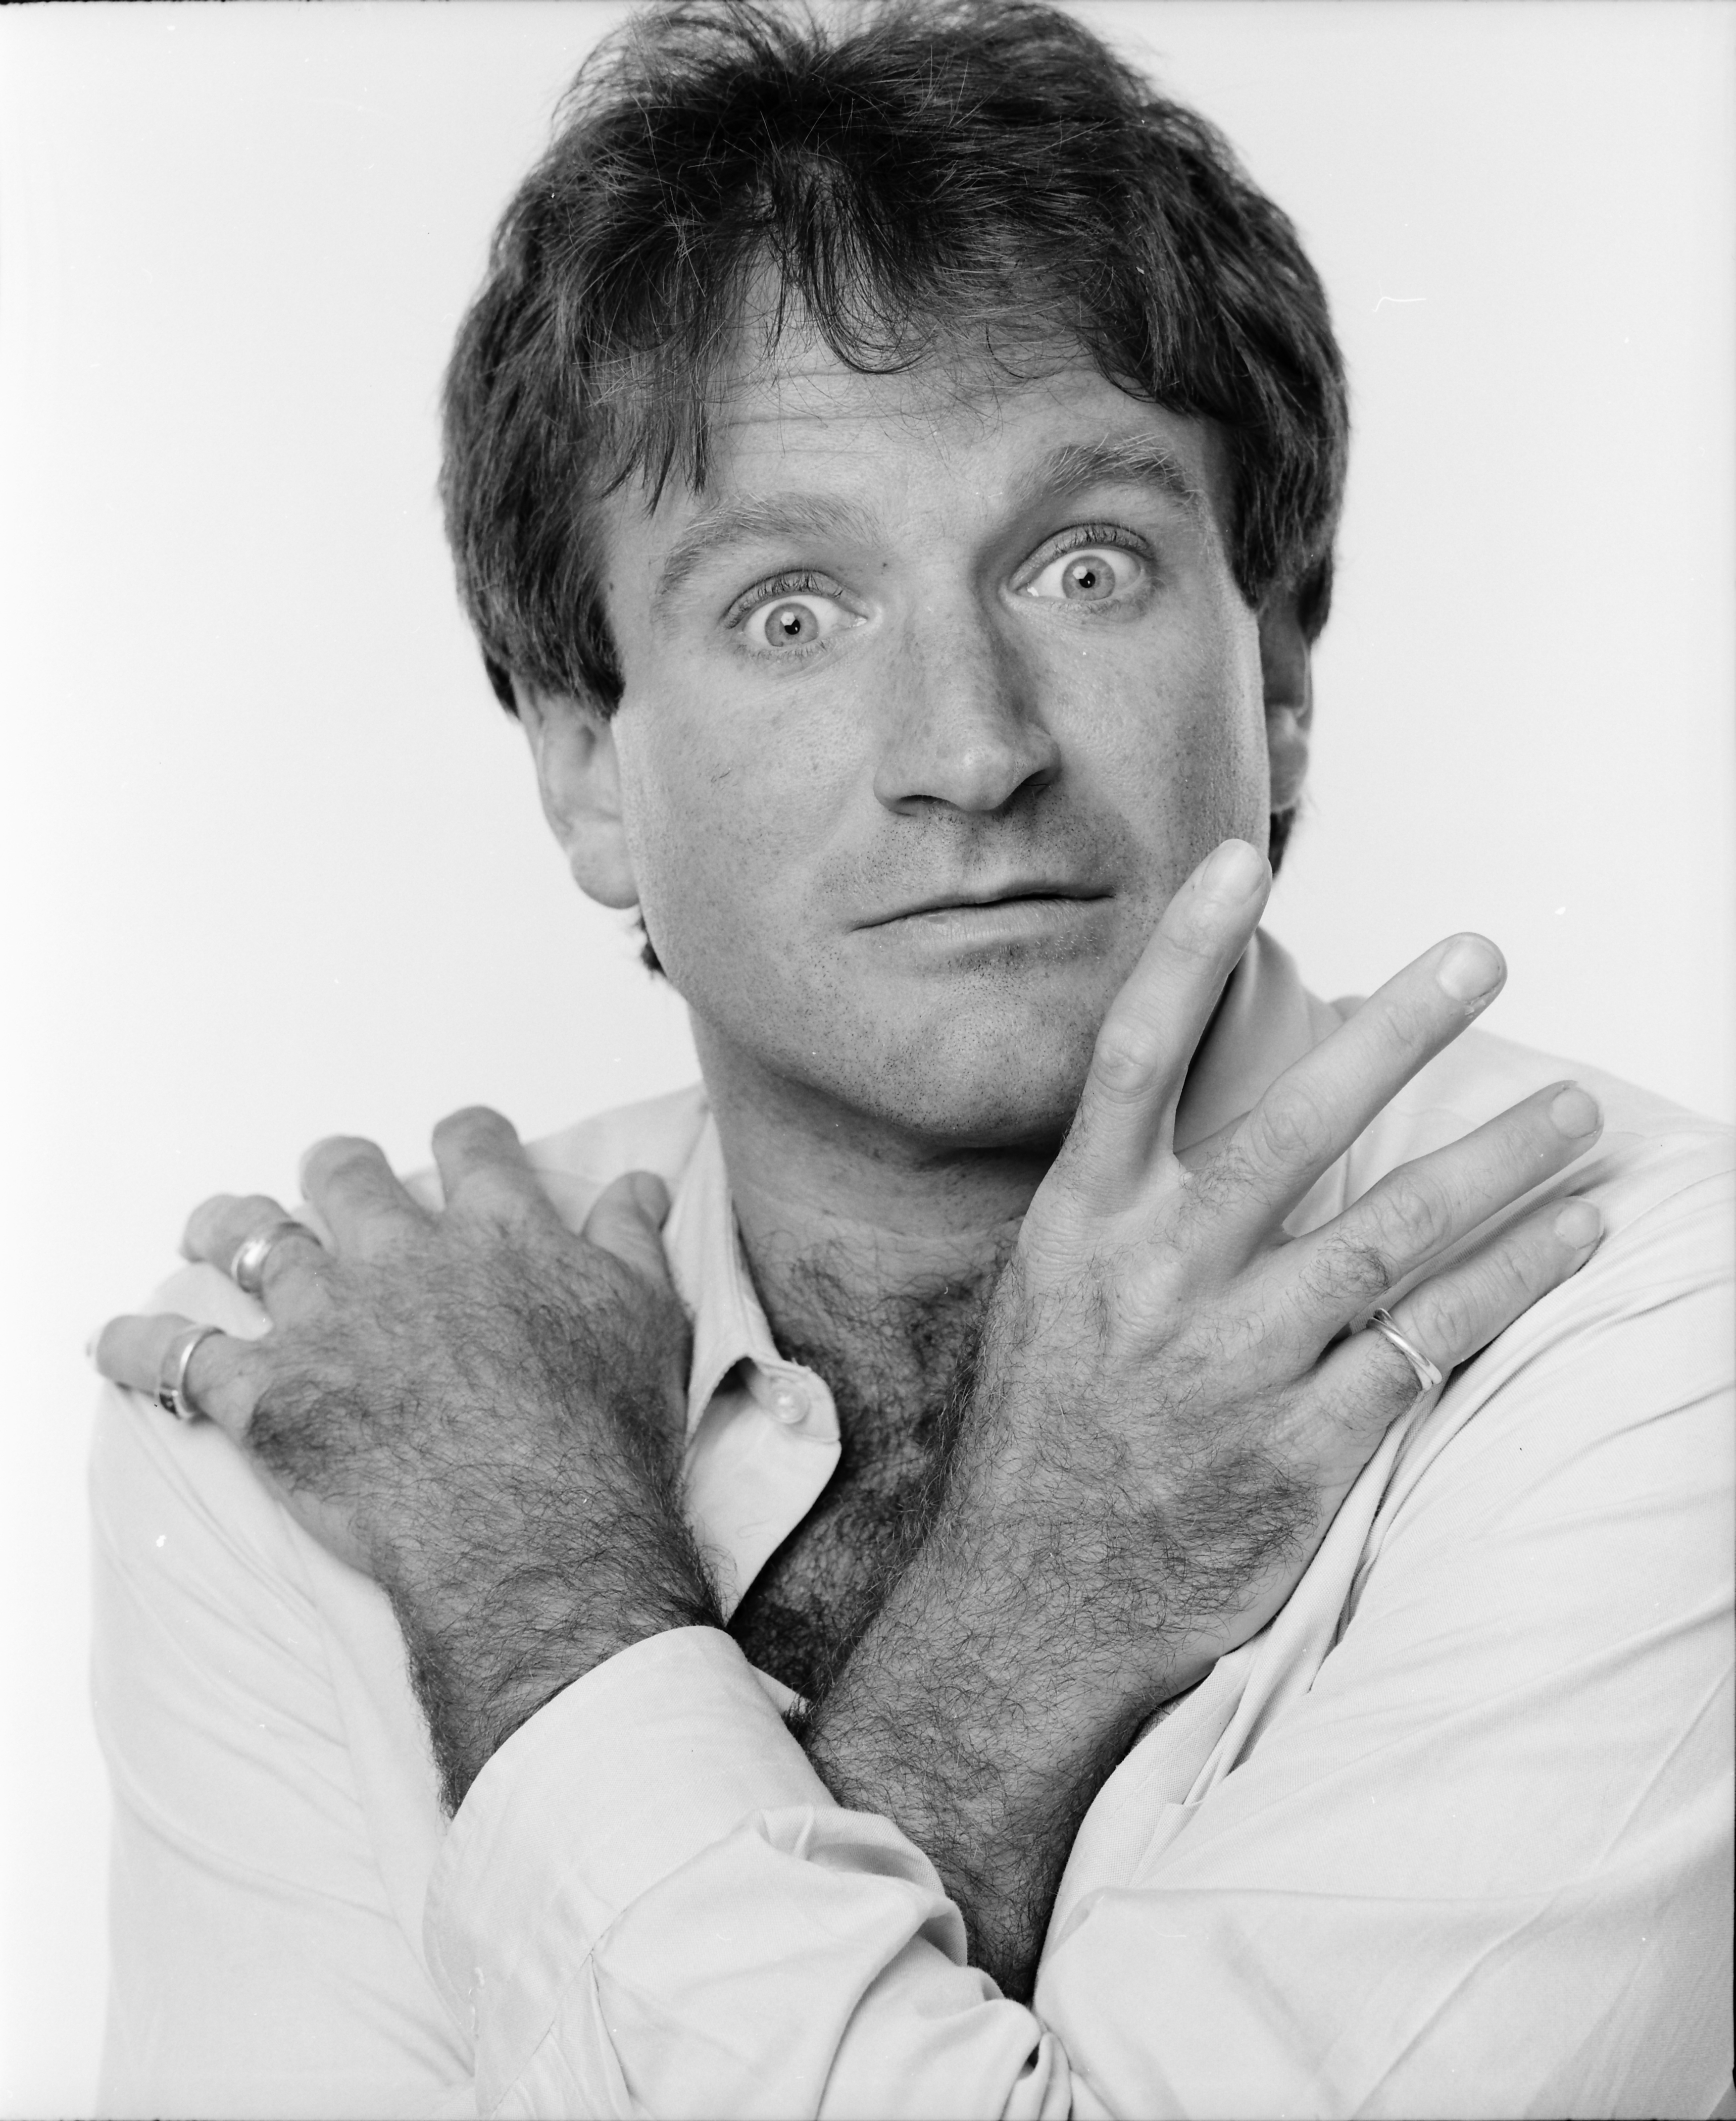 Robin Williams photographed in 1984 | Source: Getty Images